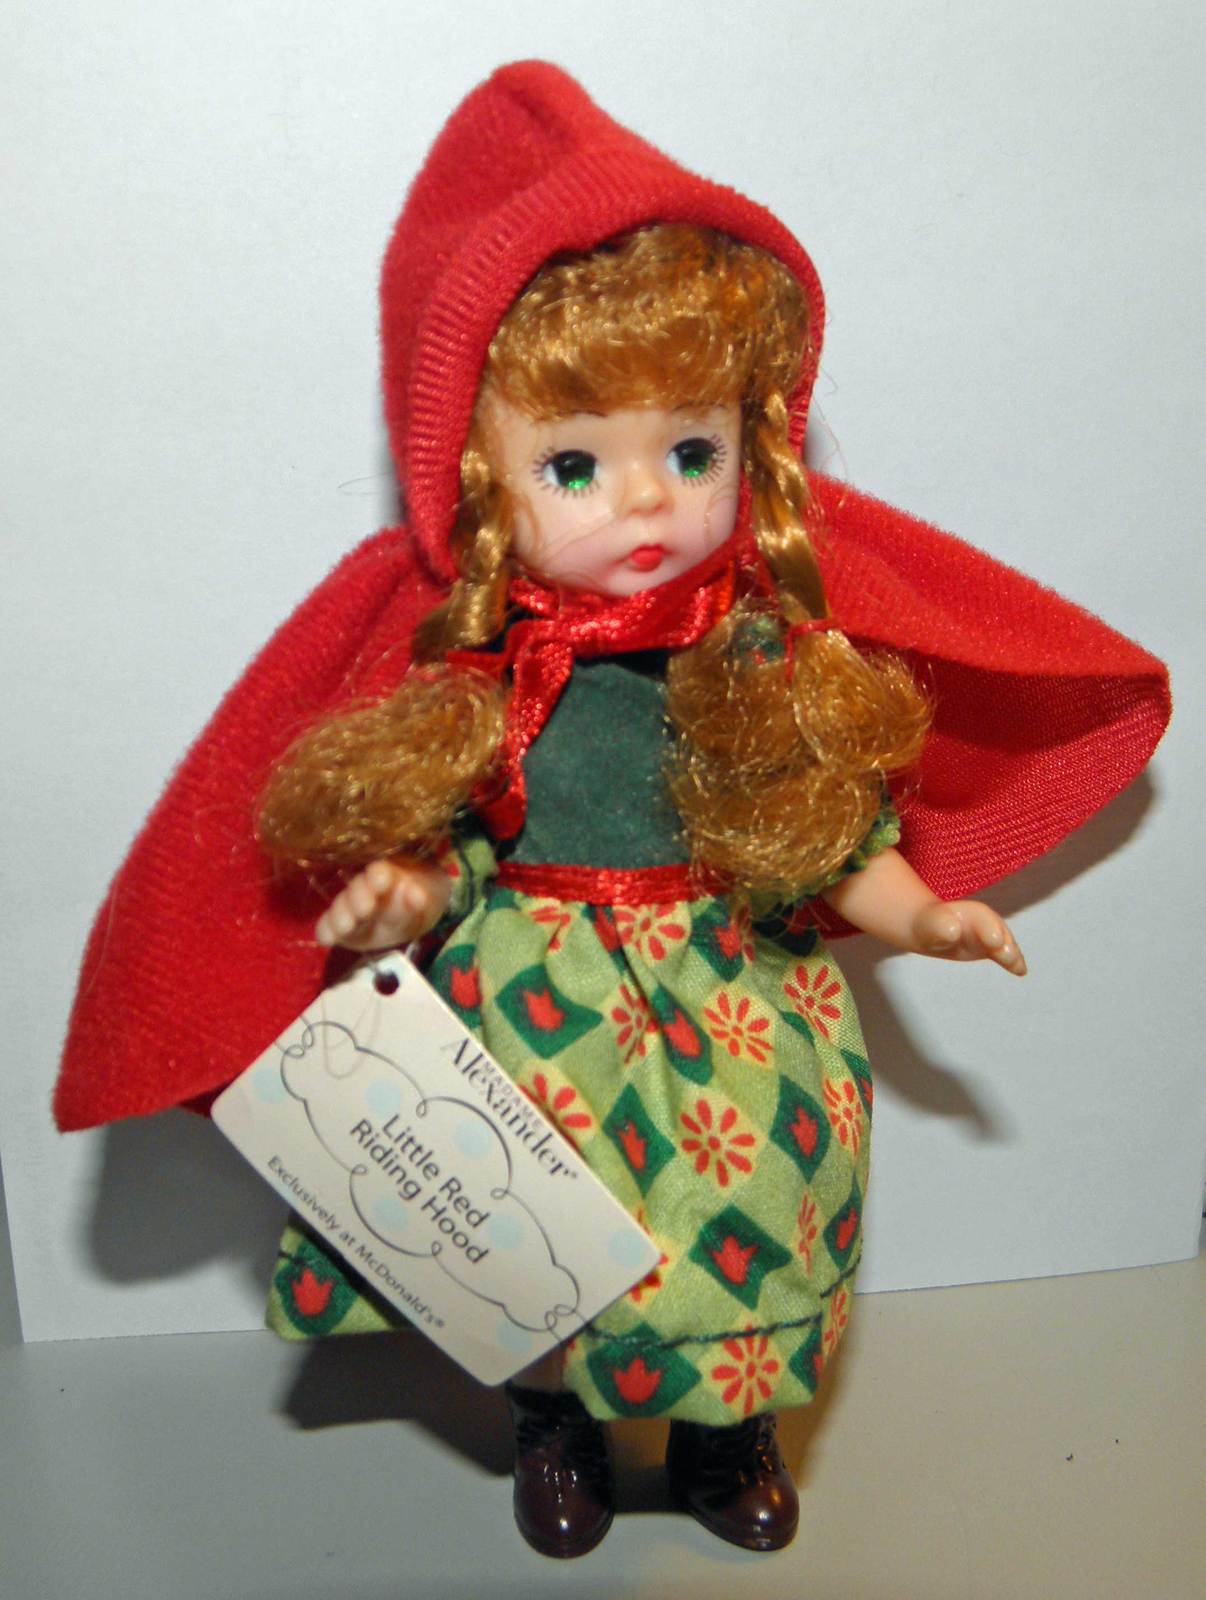 2002 McDonalds Madame Alexander Happy Meal Little Red Riding Hood Doll - $15.00